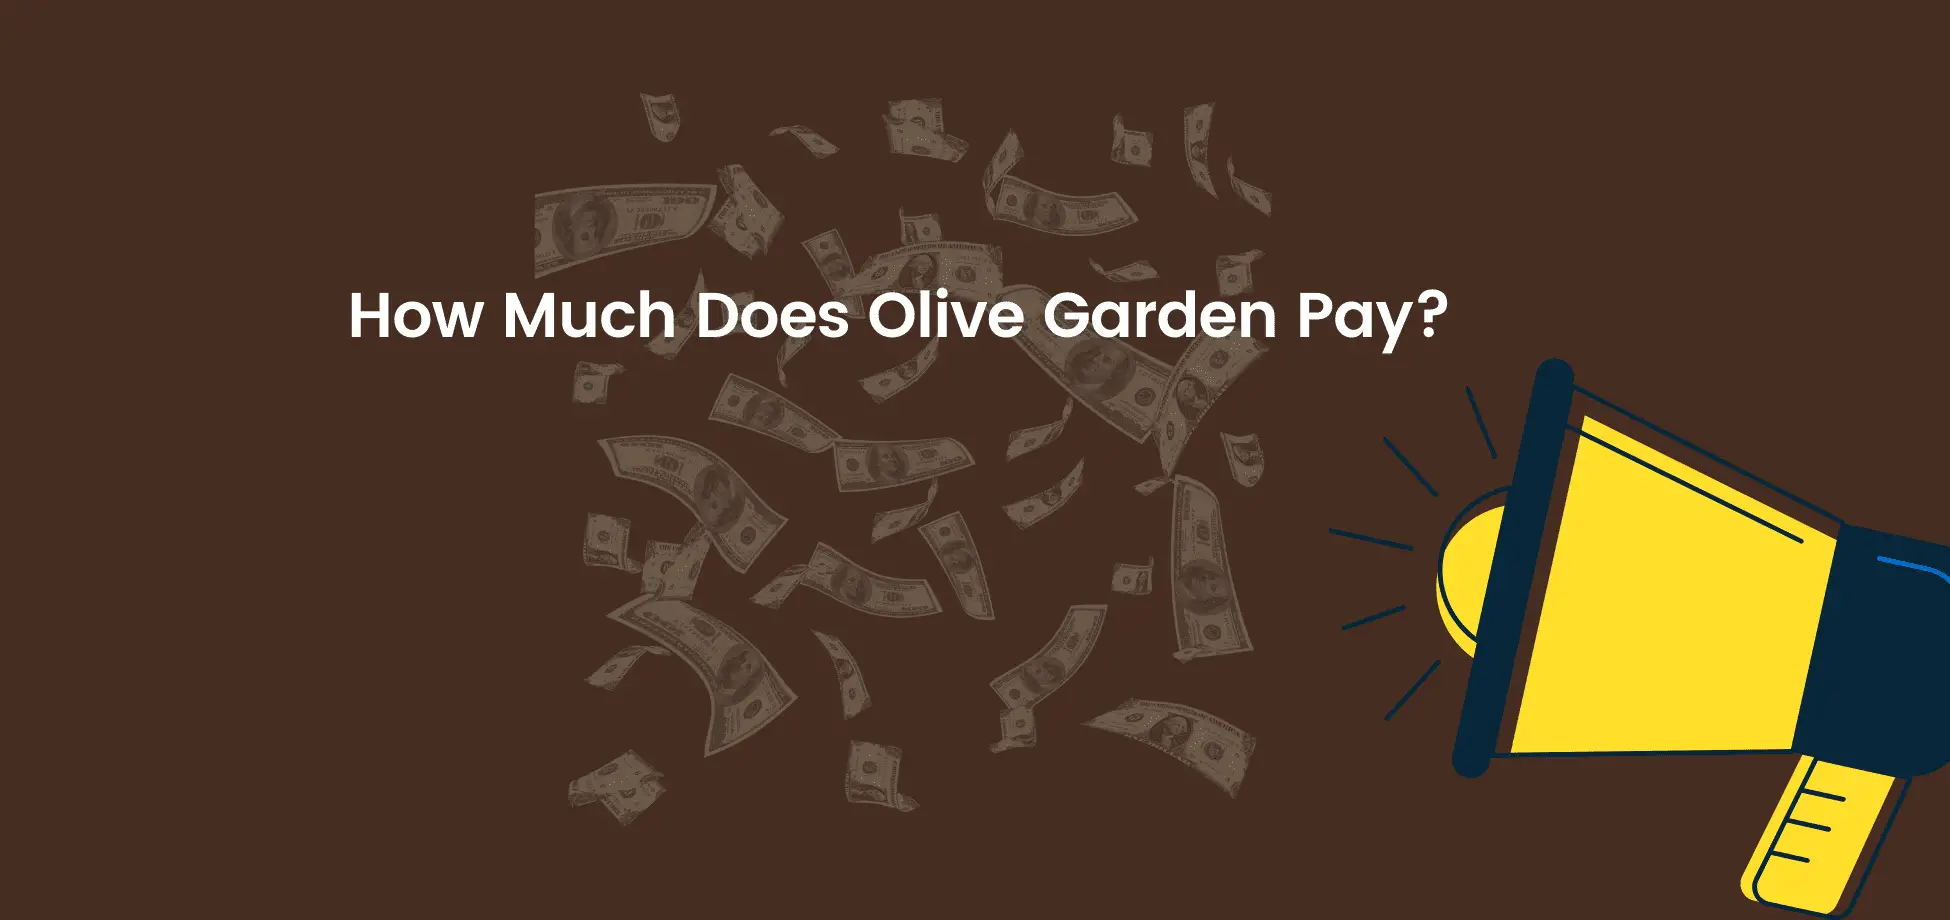 See the Olive Garden starting pay for its employees and how they've recently improved.